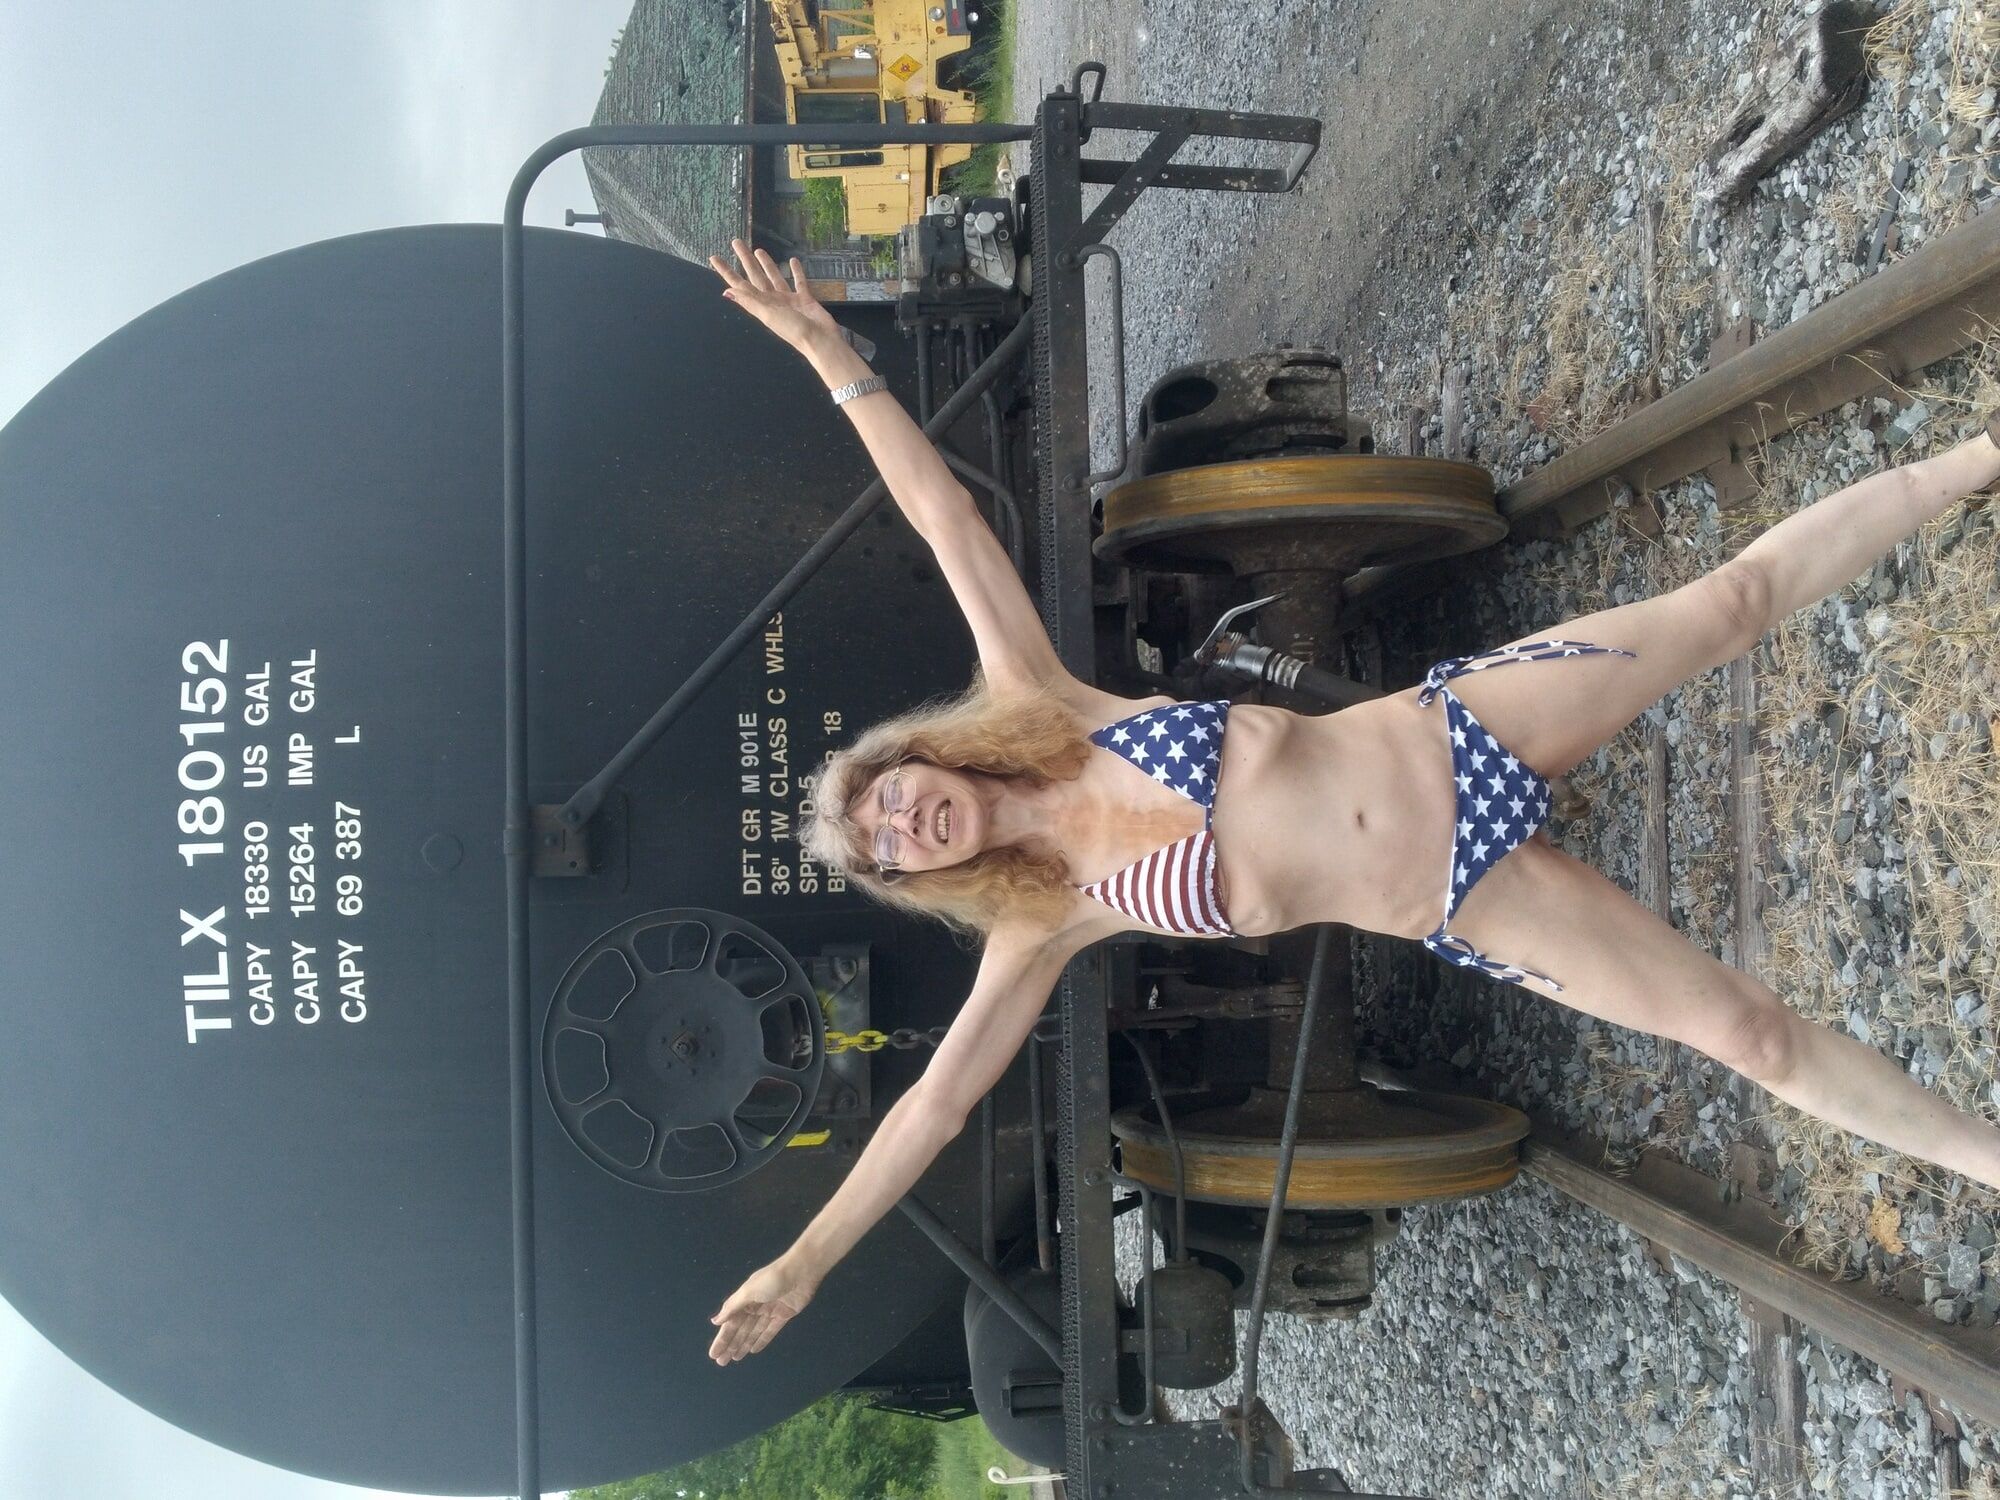 American Train. July 4th release. My best photo set to date. #14